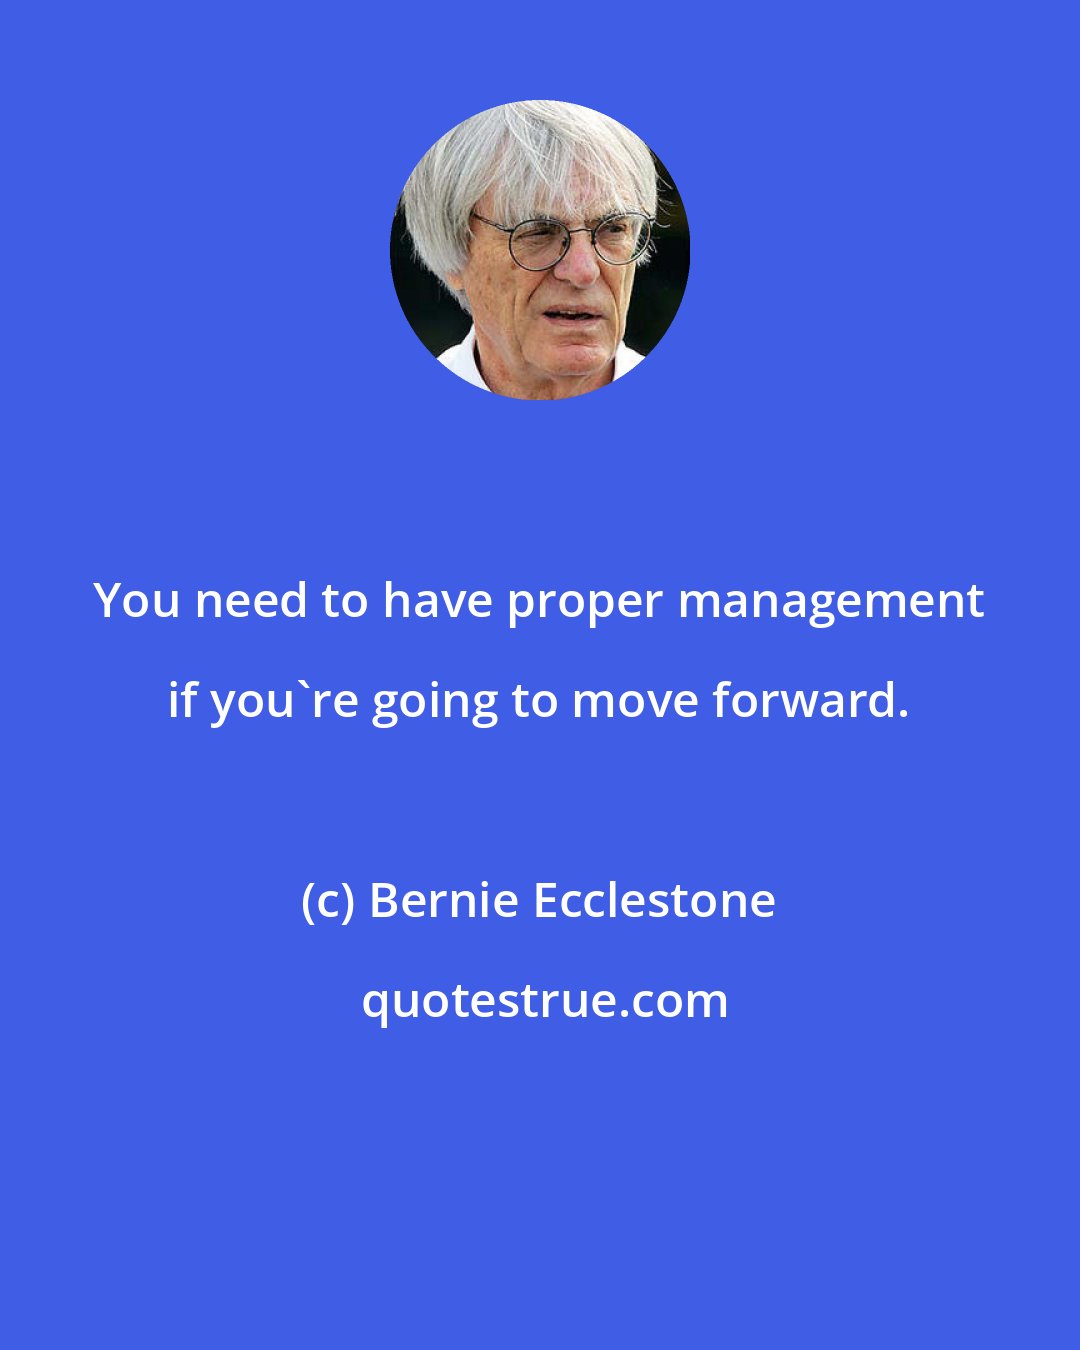 Bernie Ecclestone: You need to have proper management if you're going to move forward.